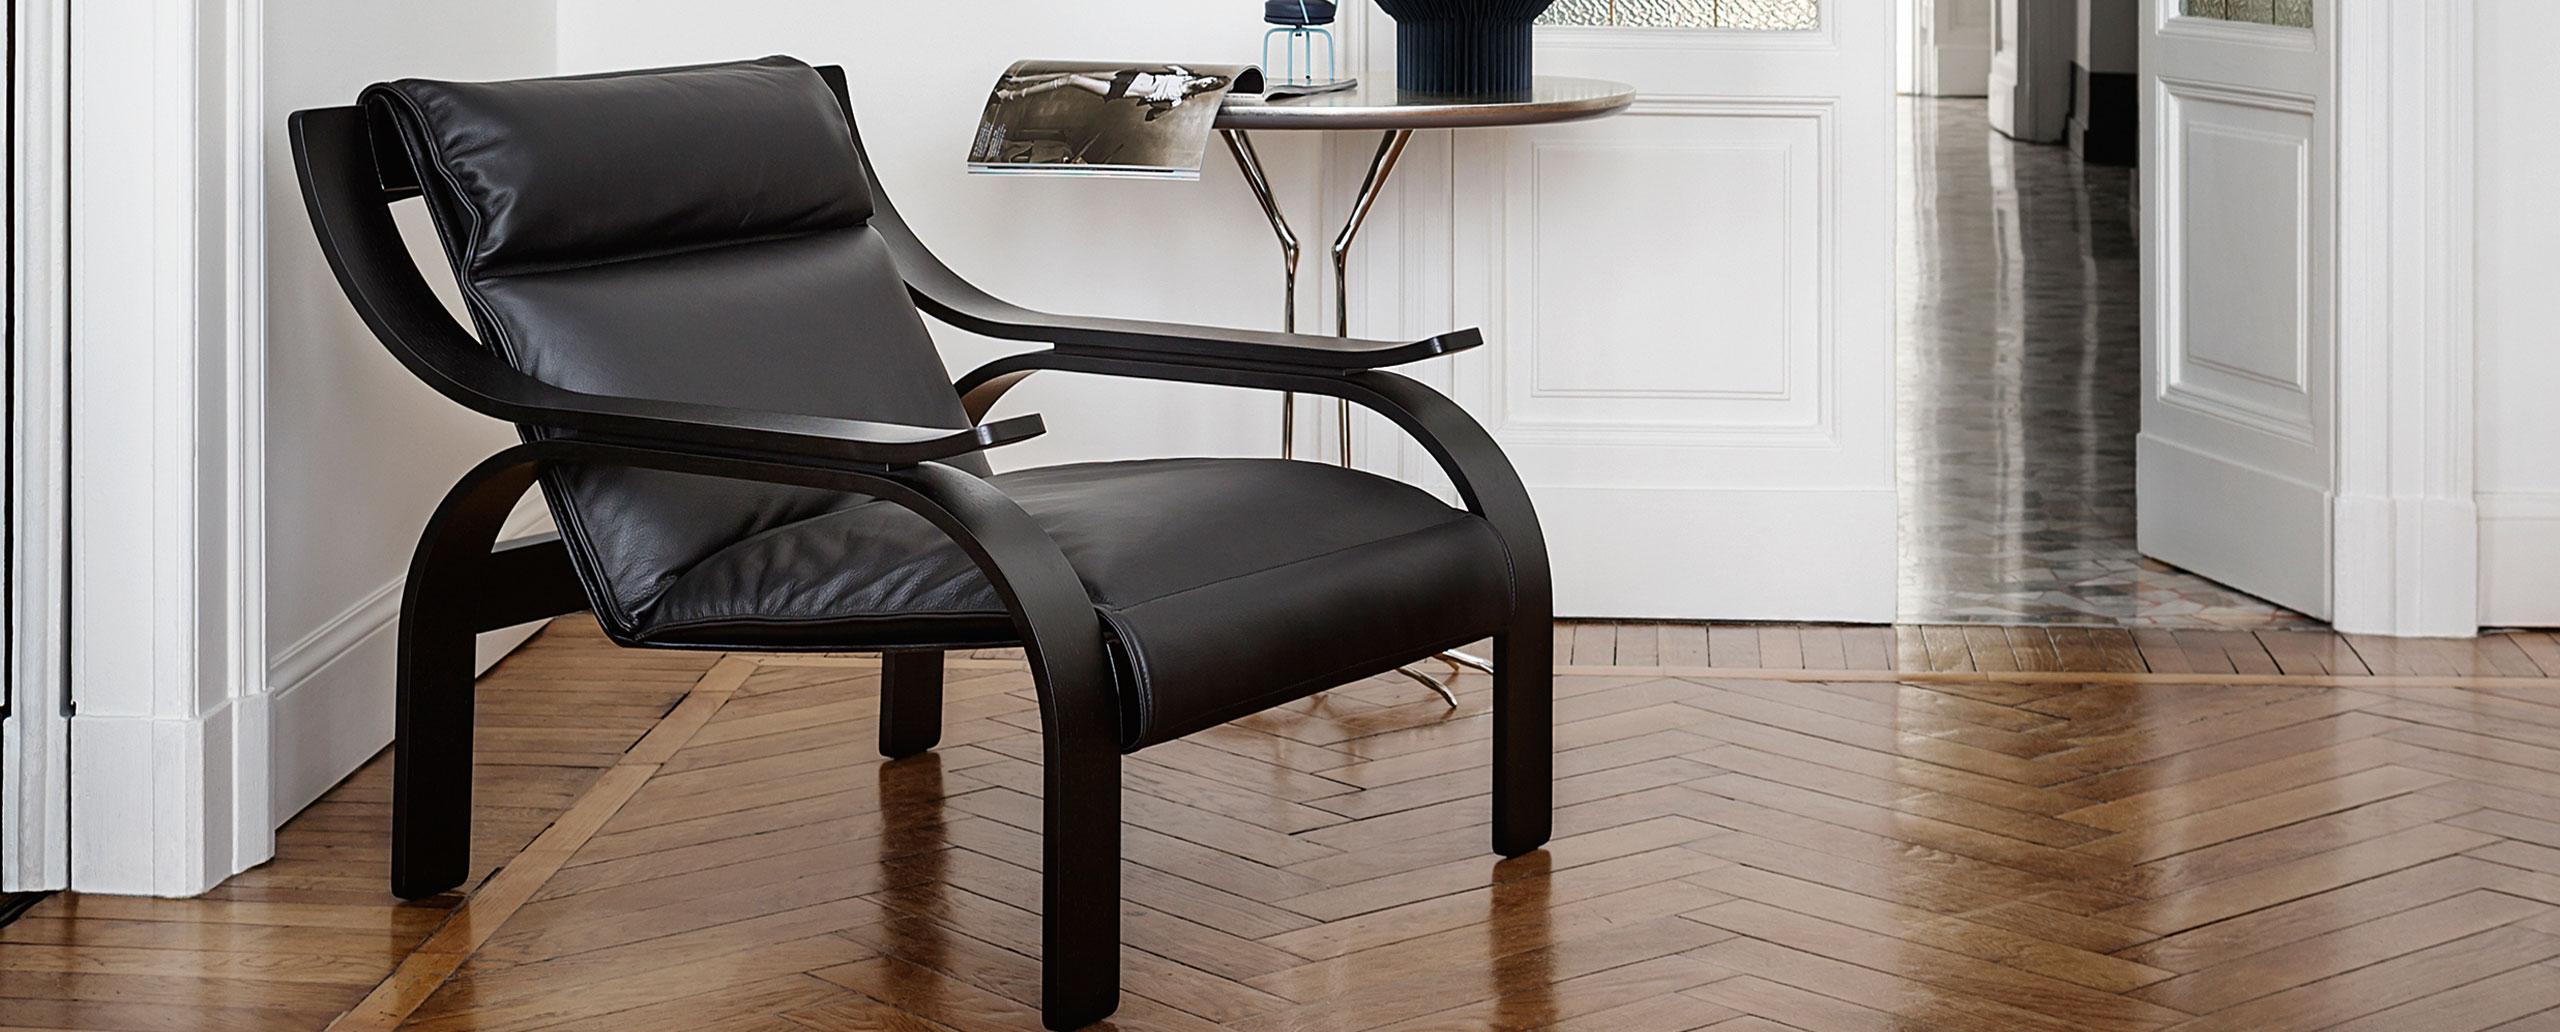 Marco Zanuso Leather Woodline Armchair by Cassina 2